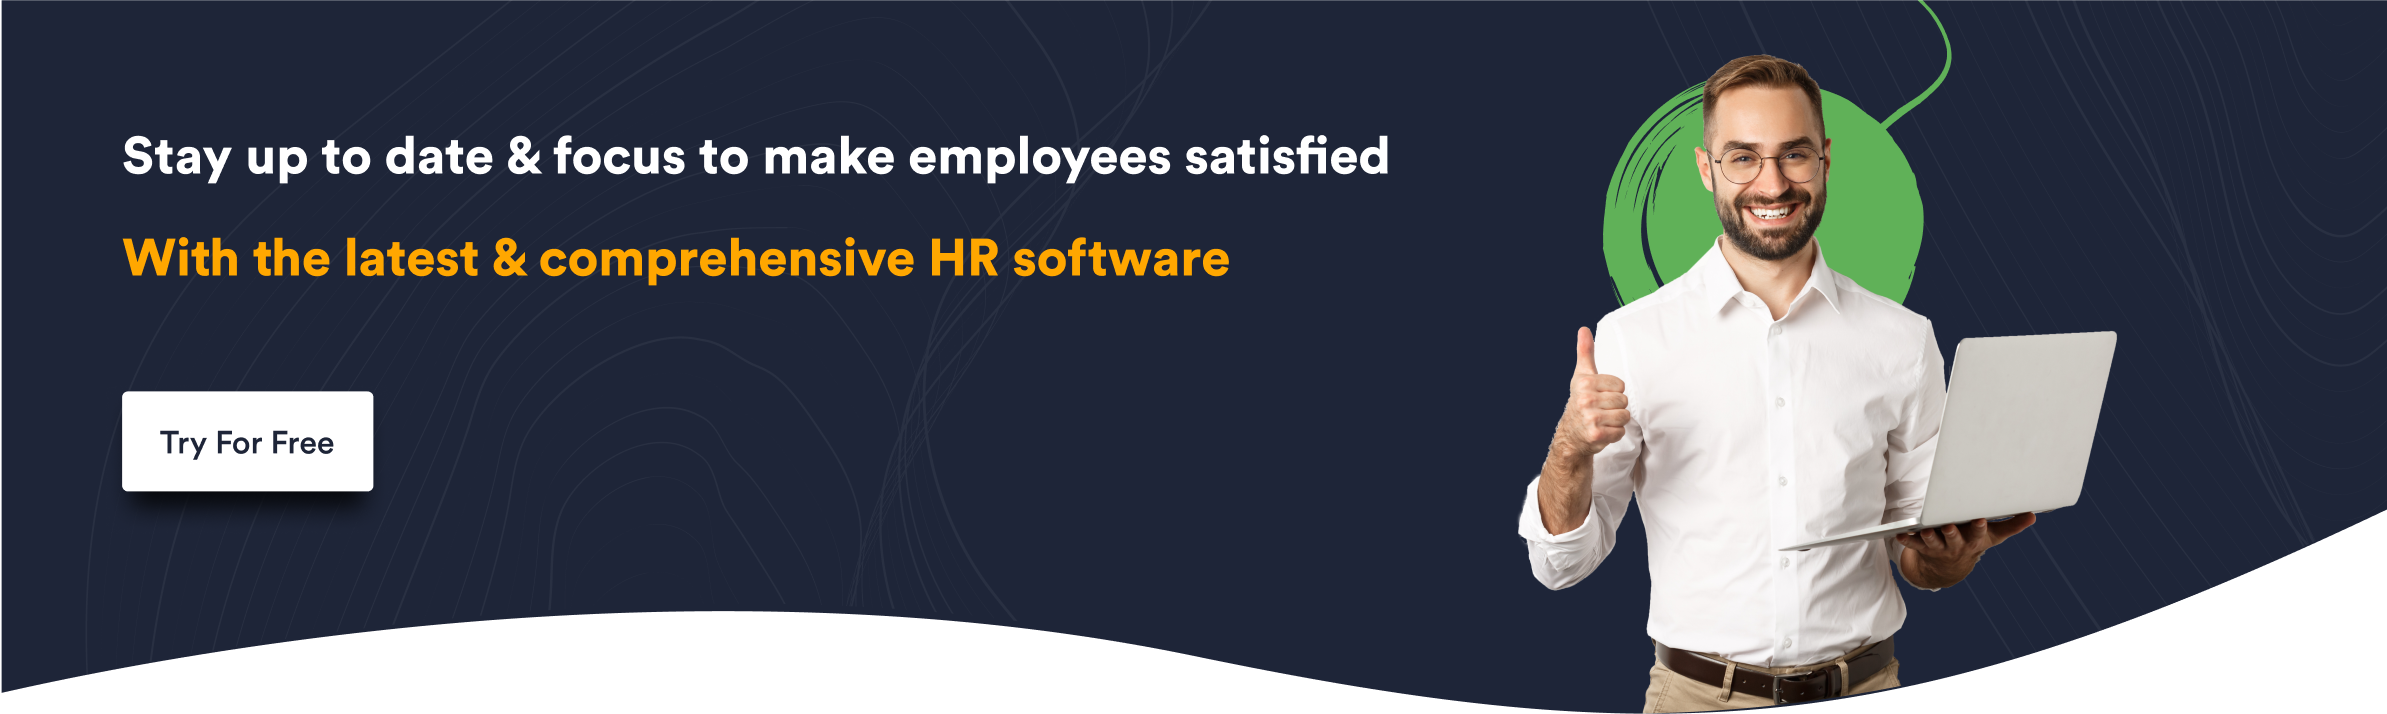 Stay up to date focus to make employees satisfied